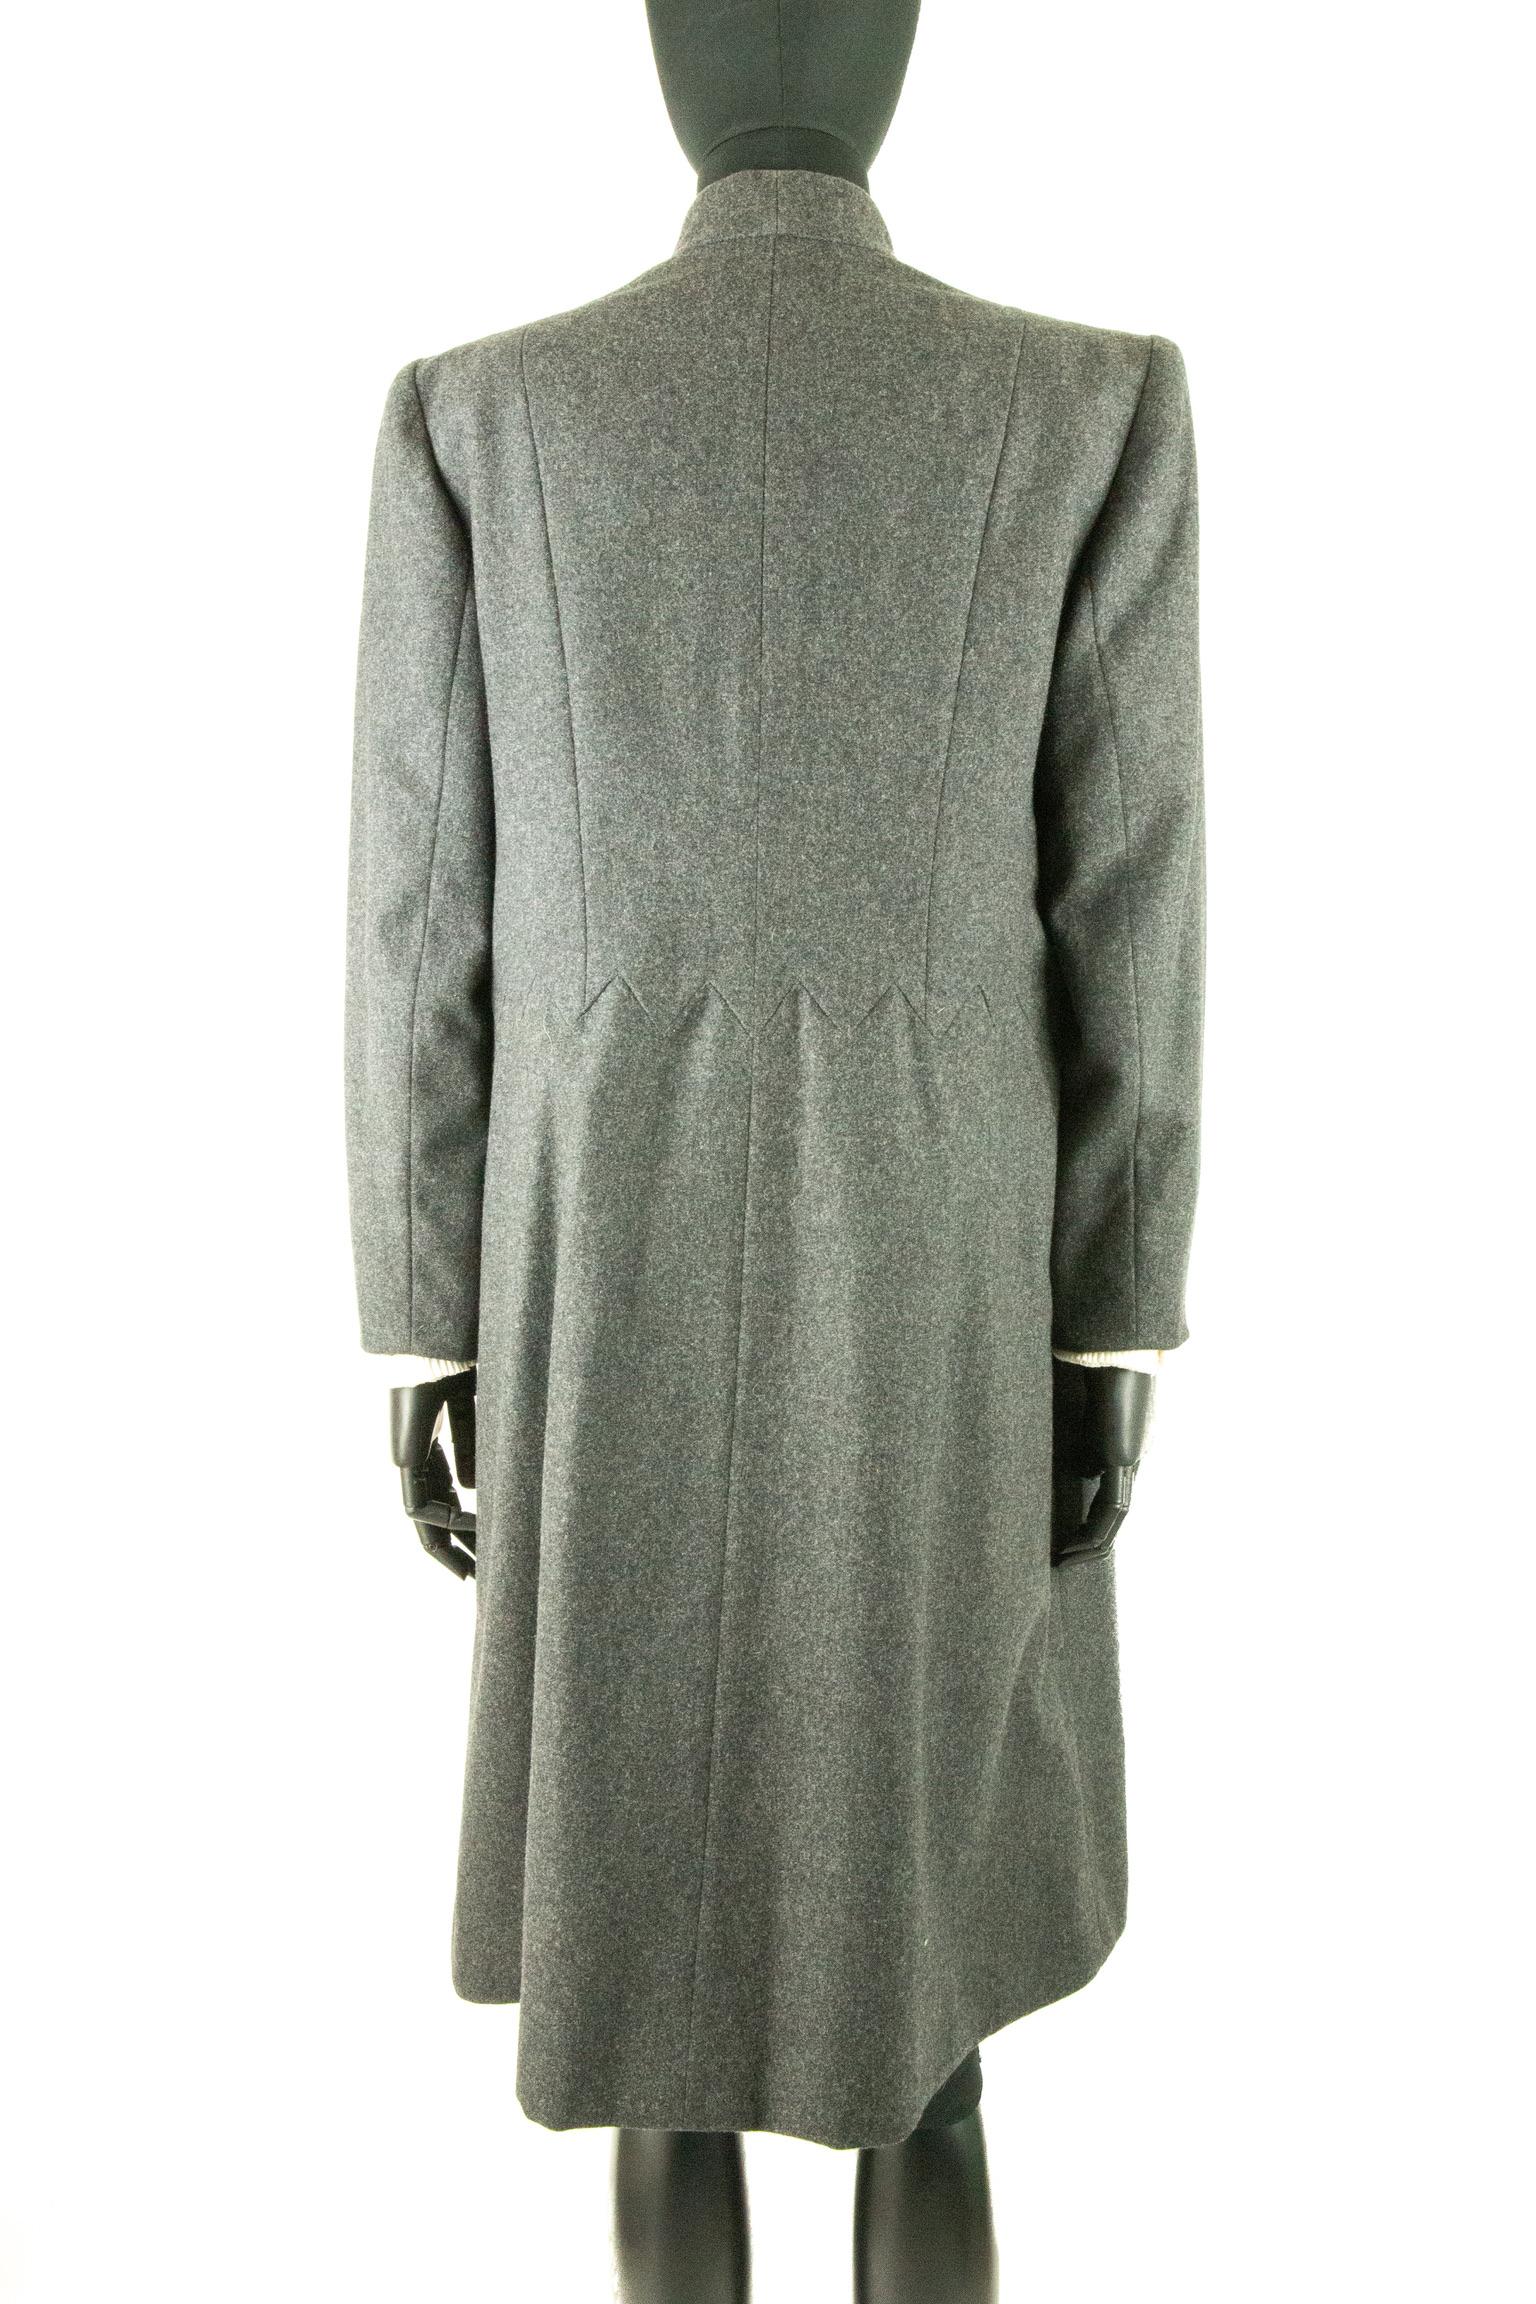 An early 1990s Christian Dior woollen mid-length coat in a charcoal grey, with princess seams on the back and front bodice. The coat has a mandarin collar and shoulder pads for additional structure. The long tapered sleeves have a detached white